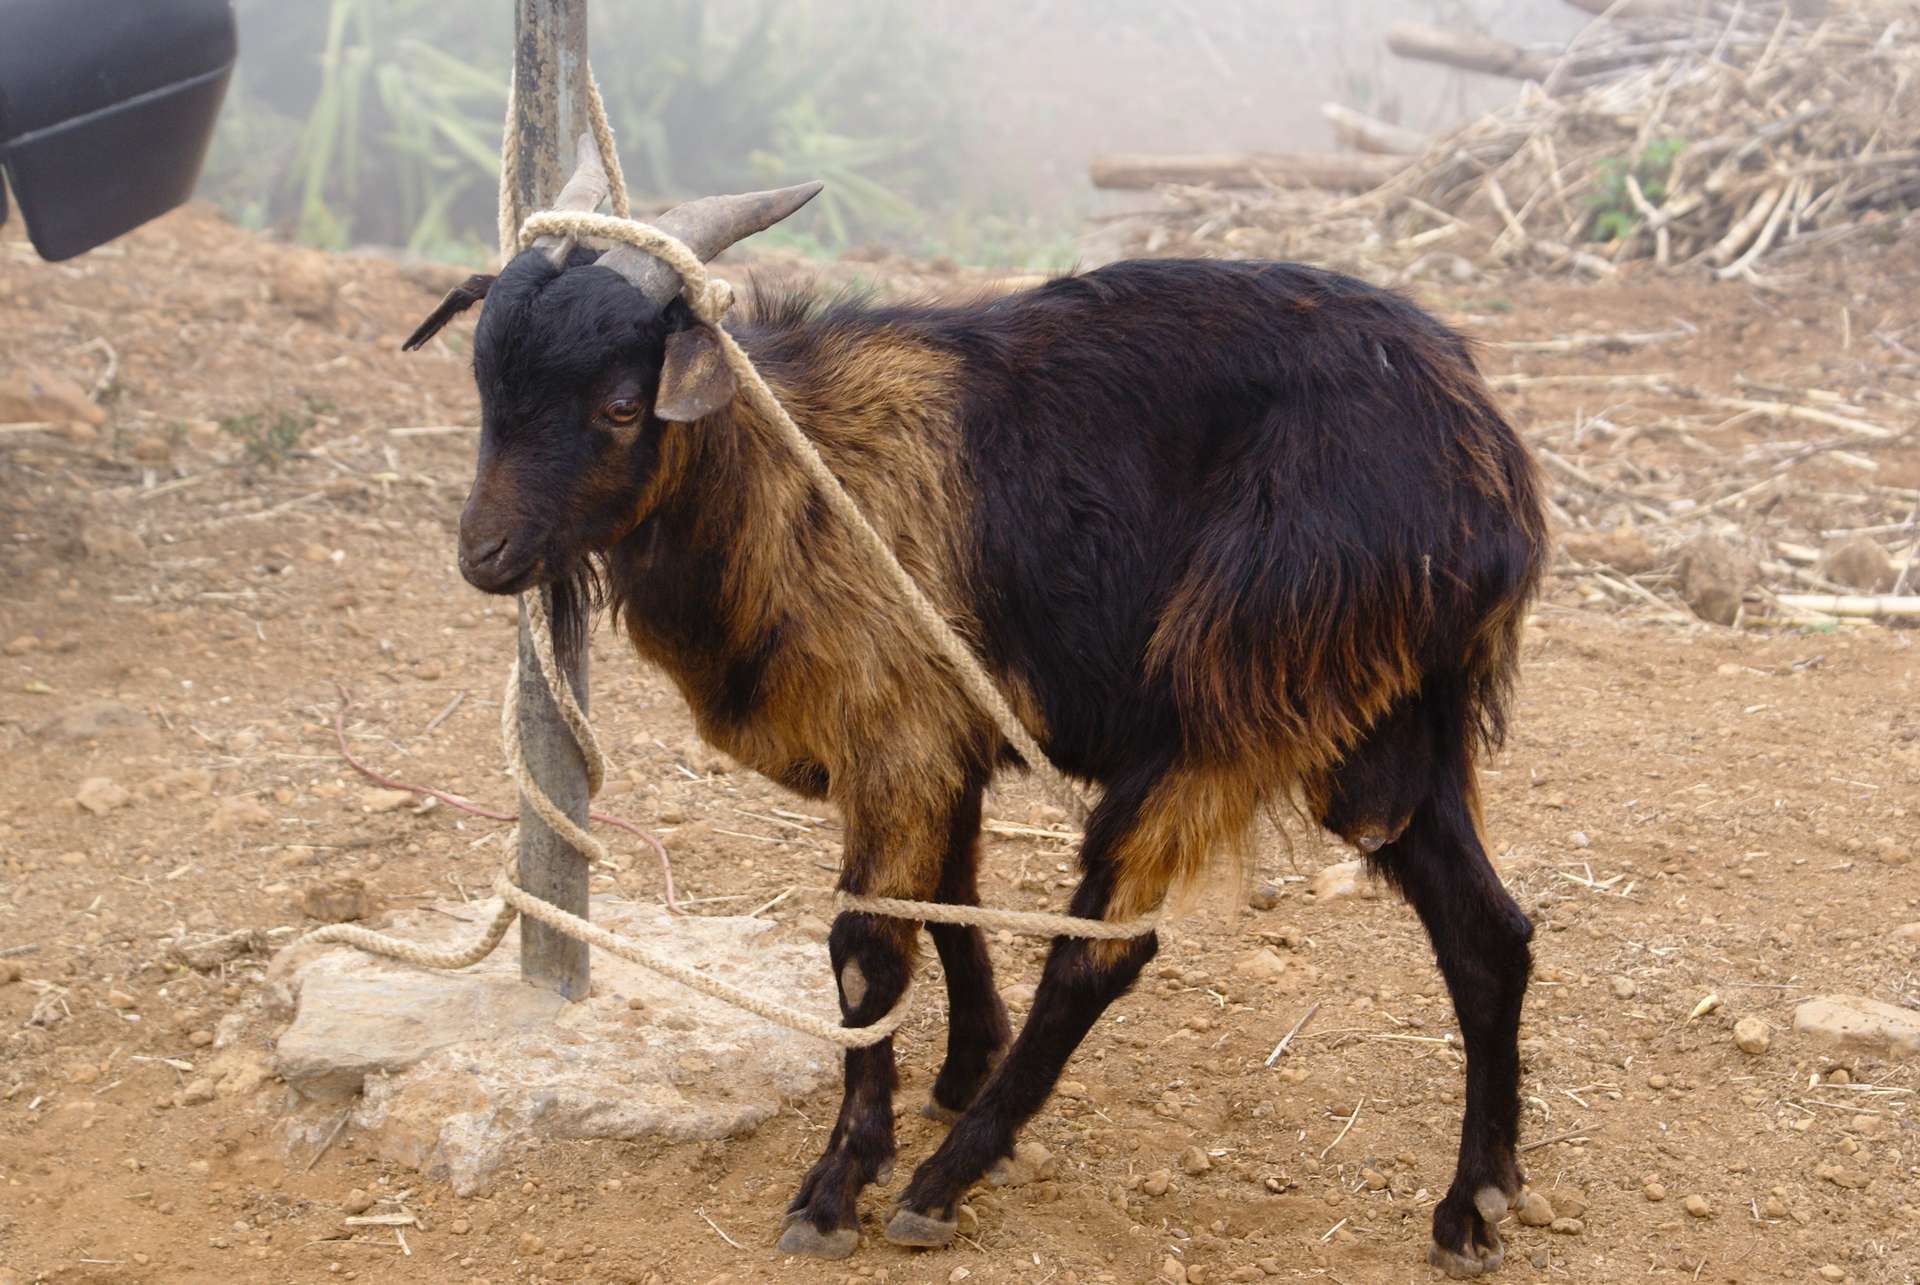 a young goat tangled in a rope